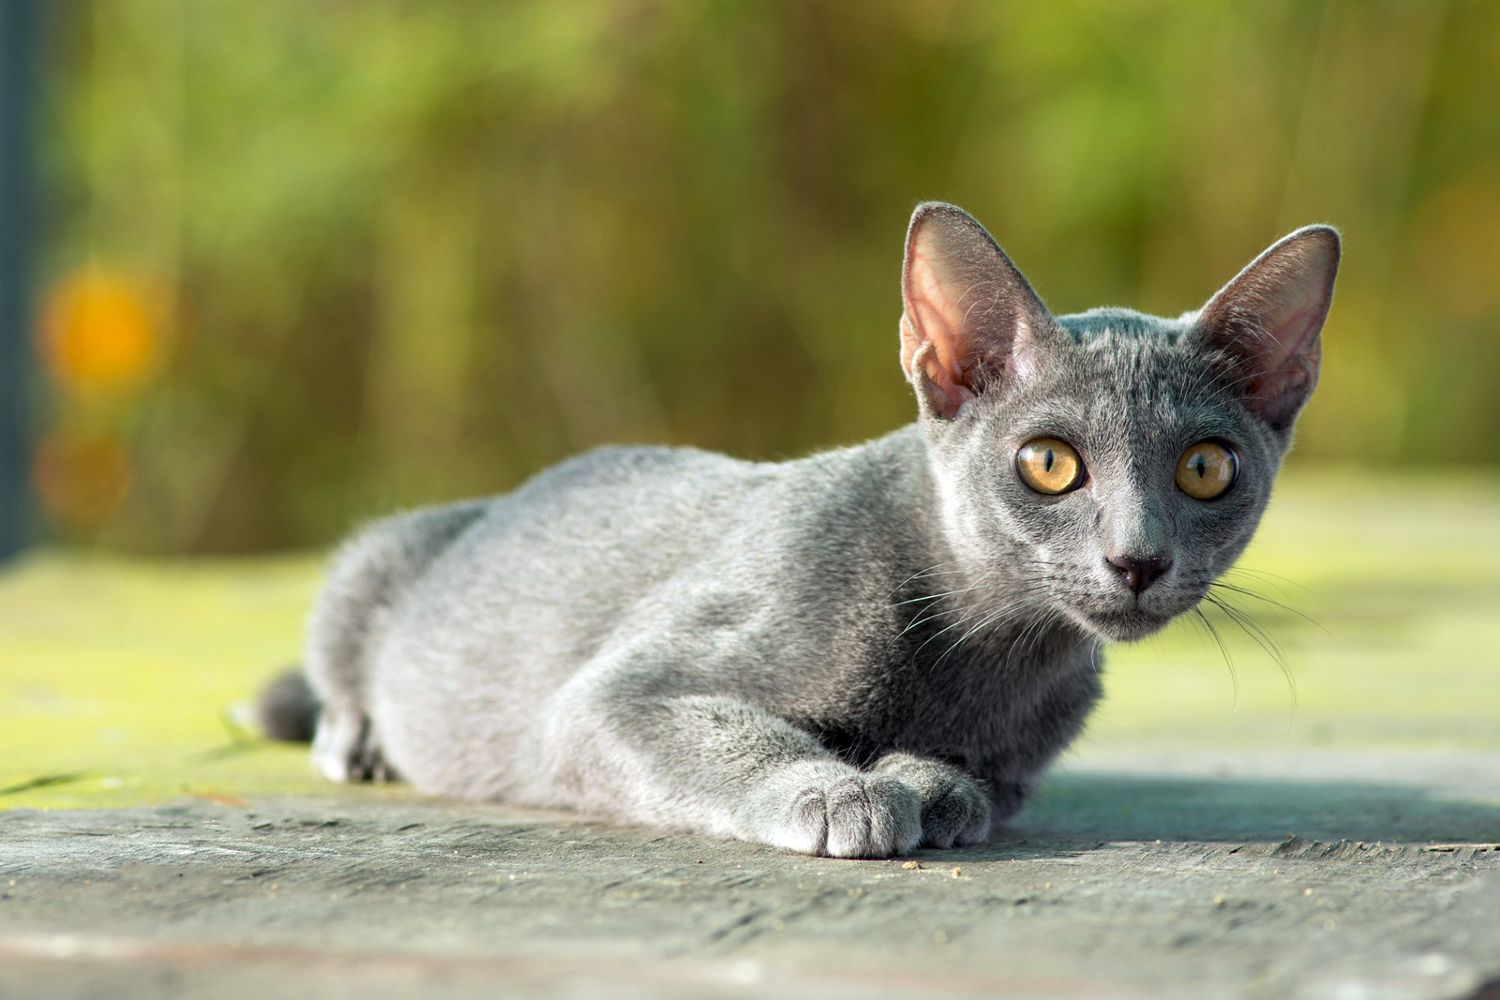 korat lying down with a green background